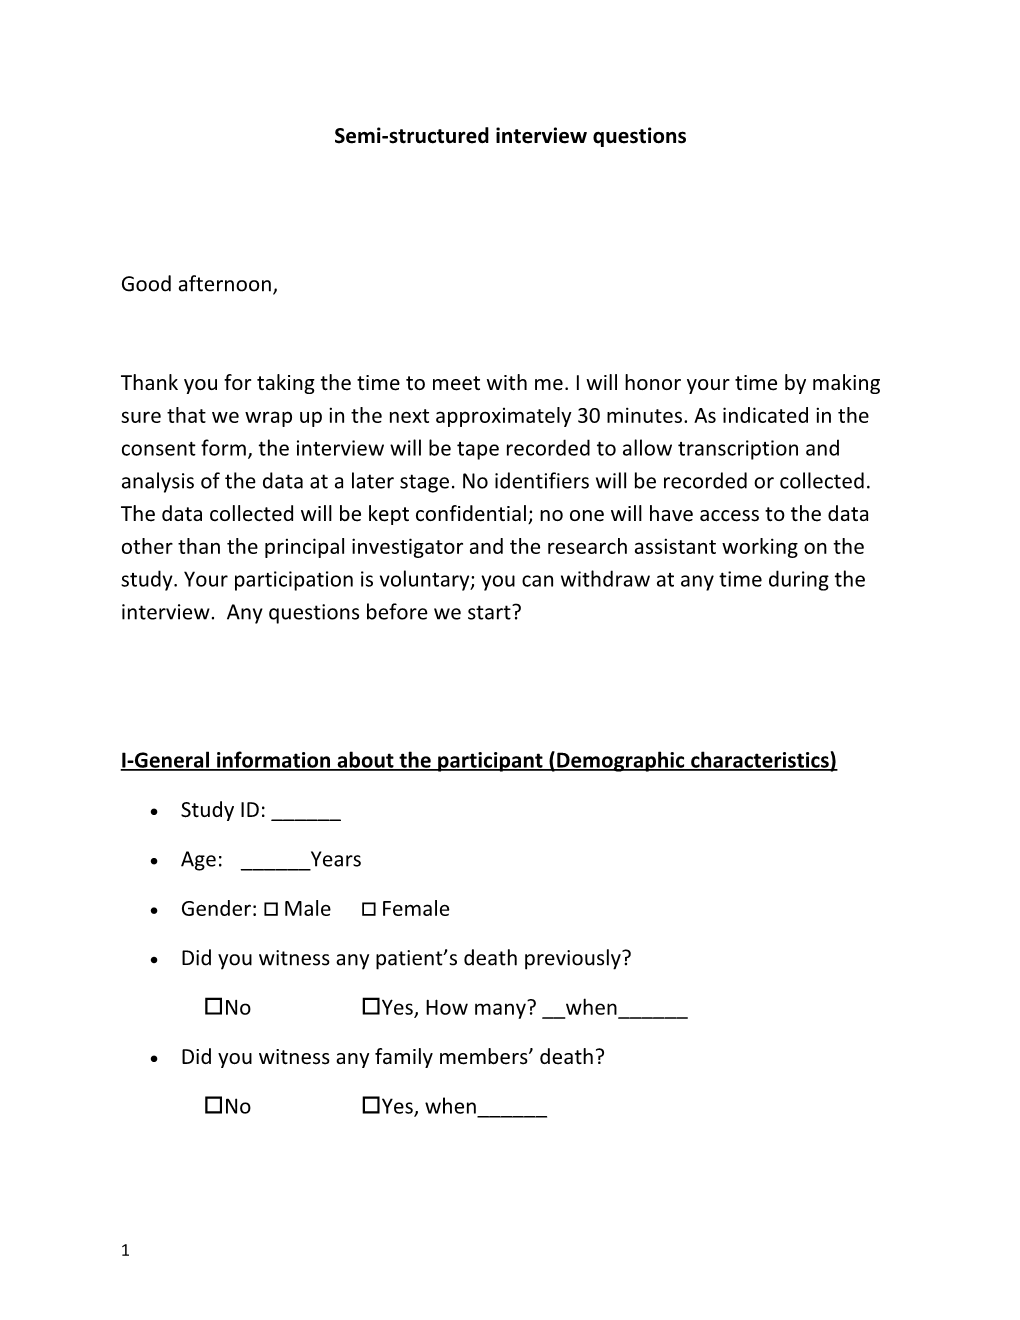 Semi-Structured Interview Questions